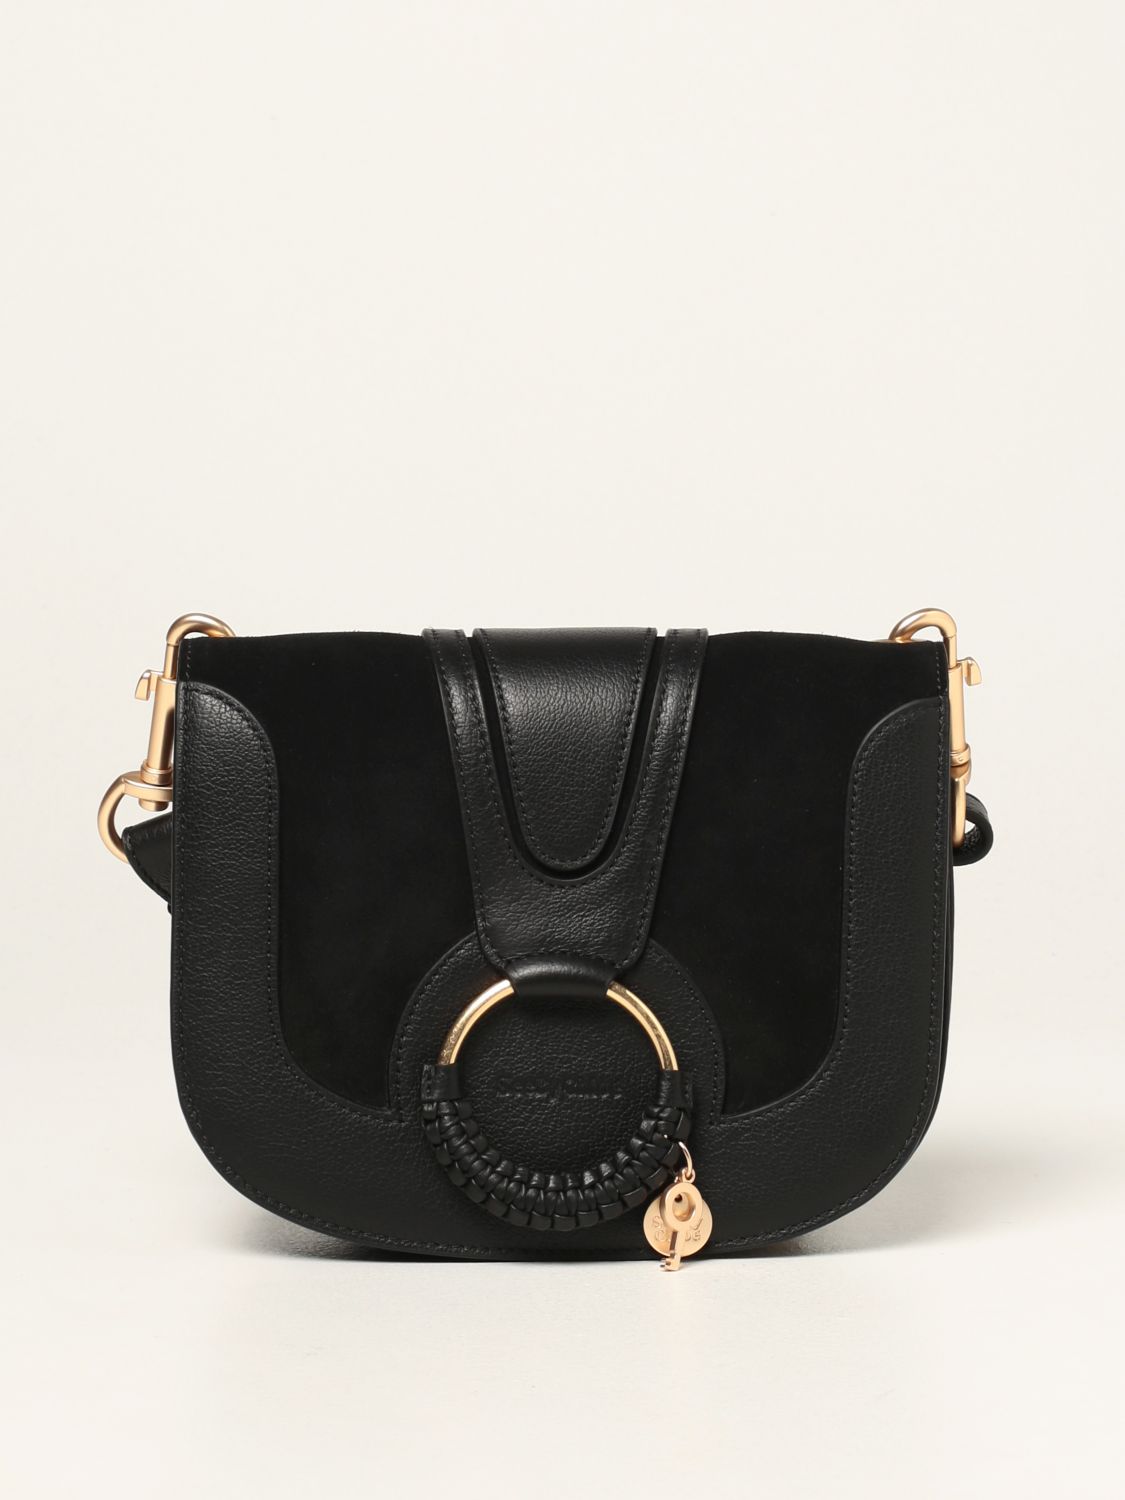 SEE BY CHLOÉ: Hana bag in grained leather and suede - Black | Crossbody ...